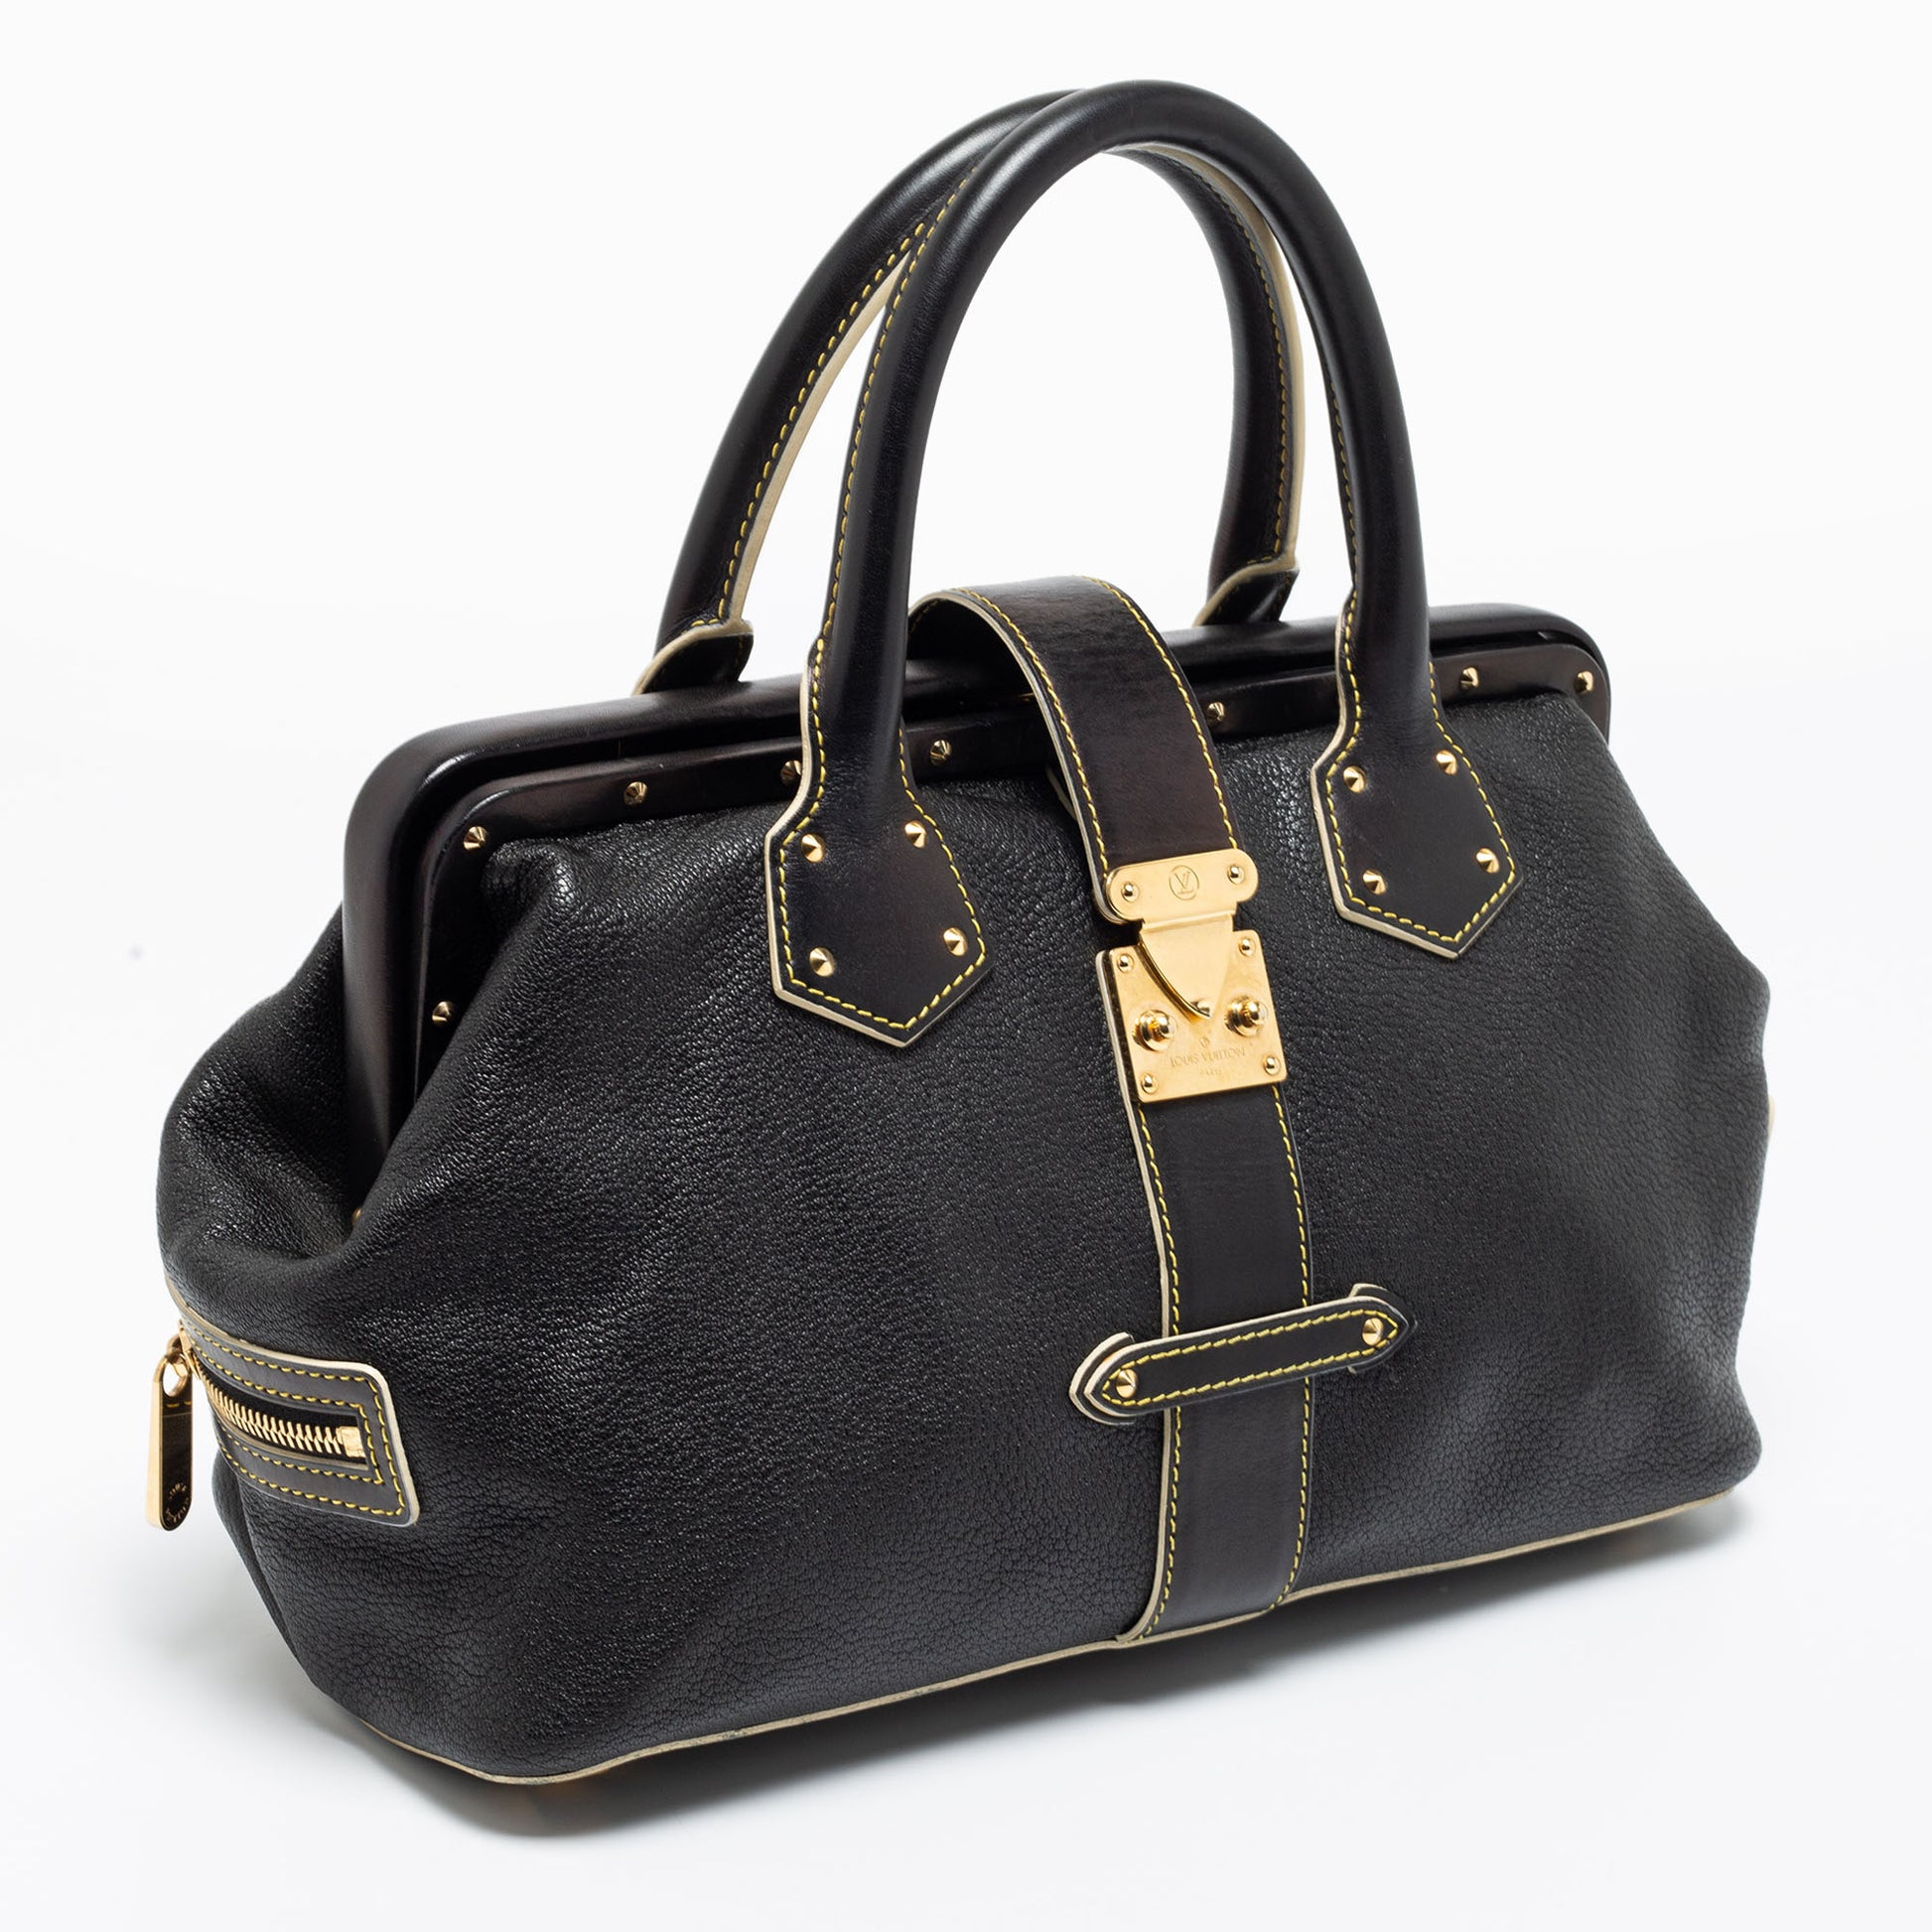 The friendly bag LOUIS VUITTON leather Suhali black topstitching